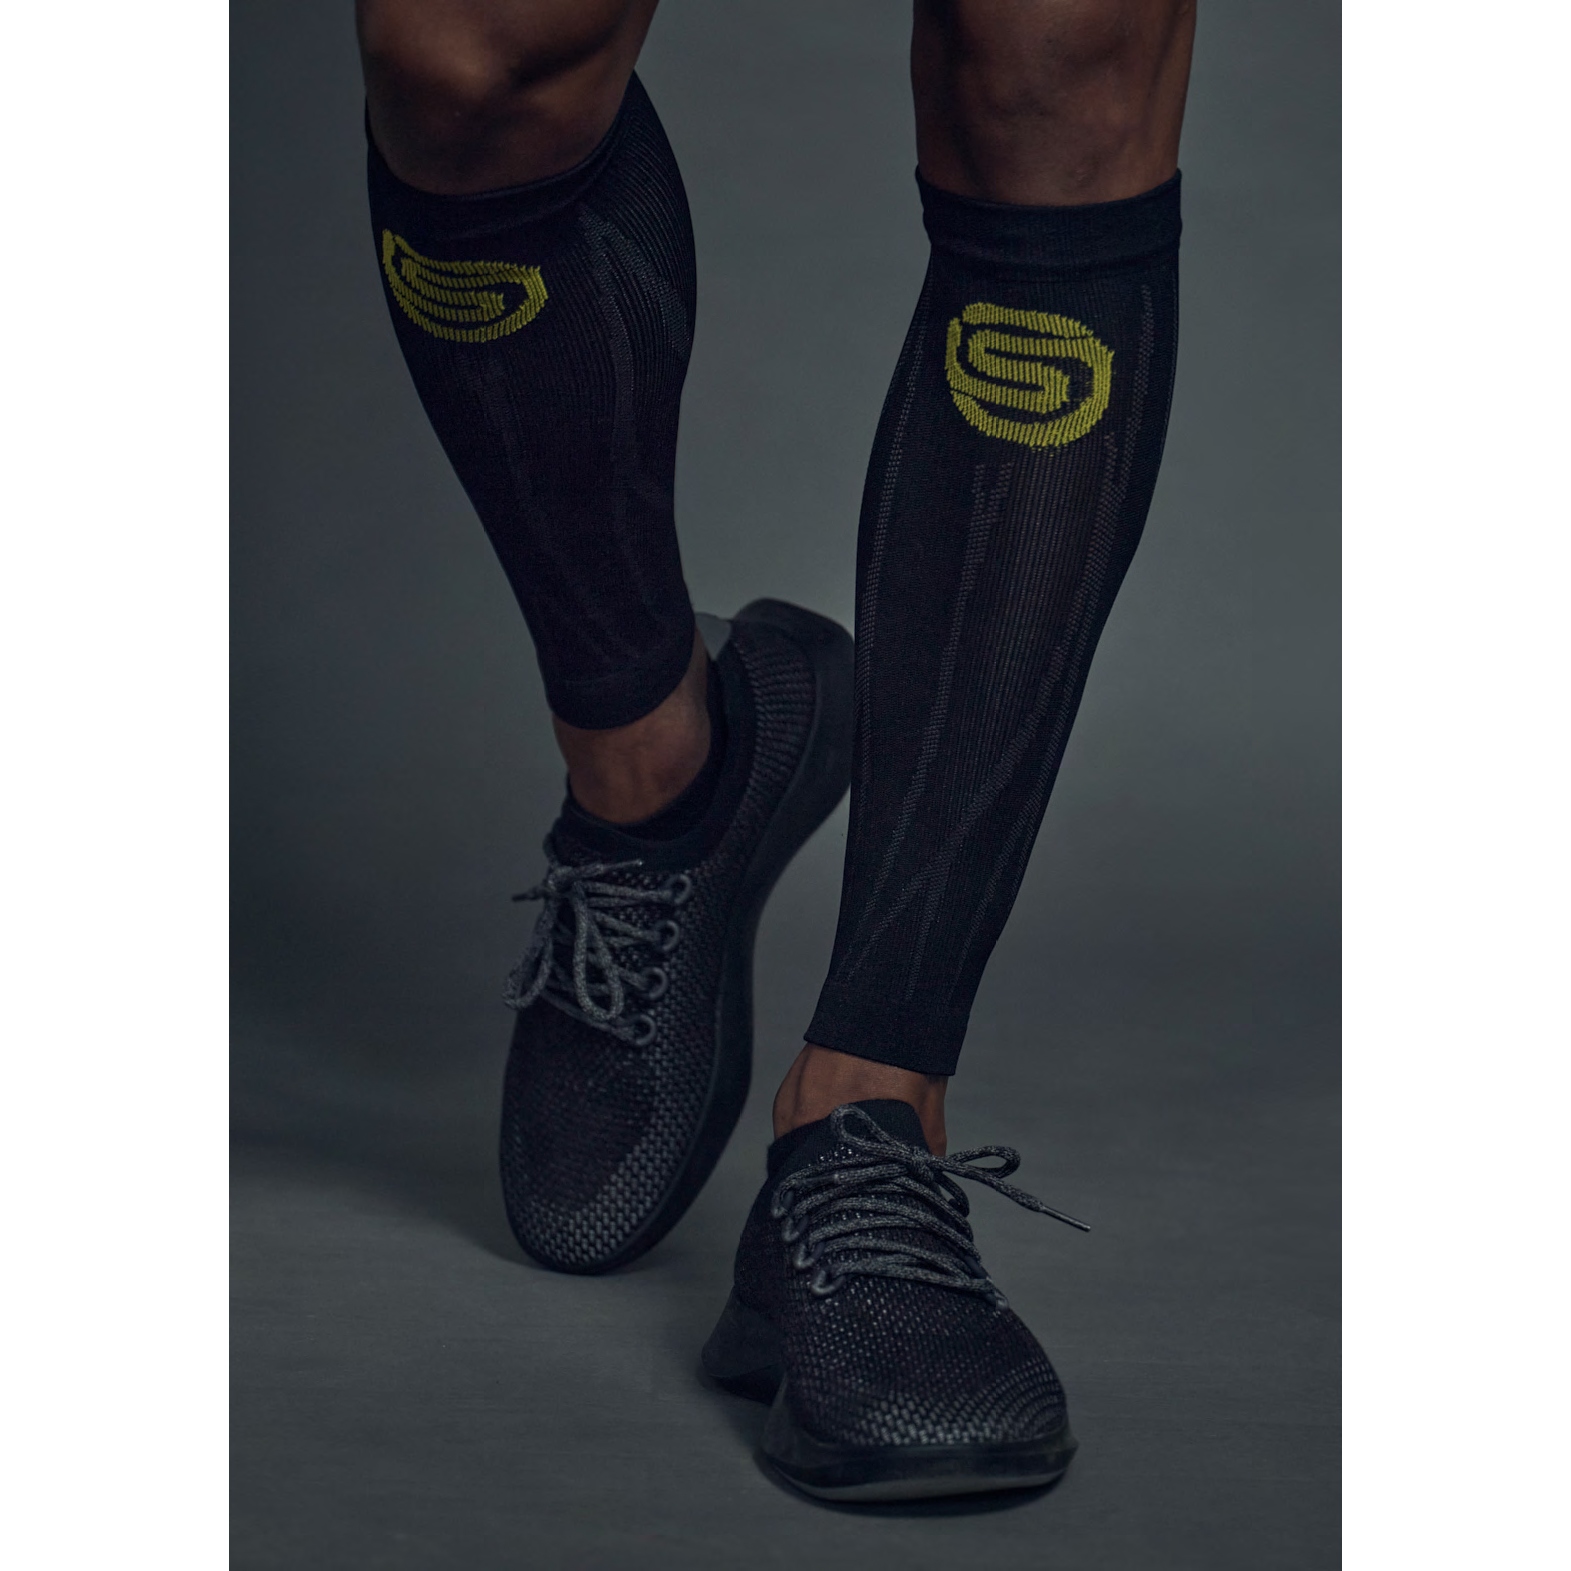 SKINS Compression 3-Series Unisex Seamless Recovery Calf Sleeves